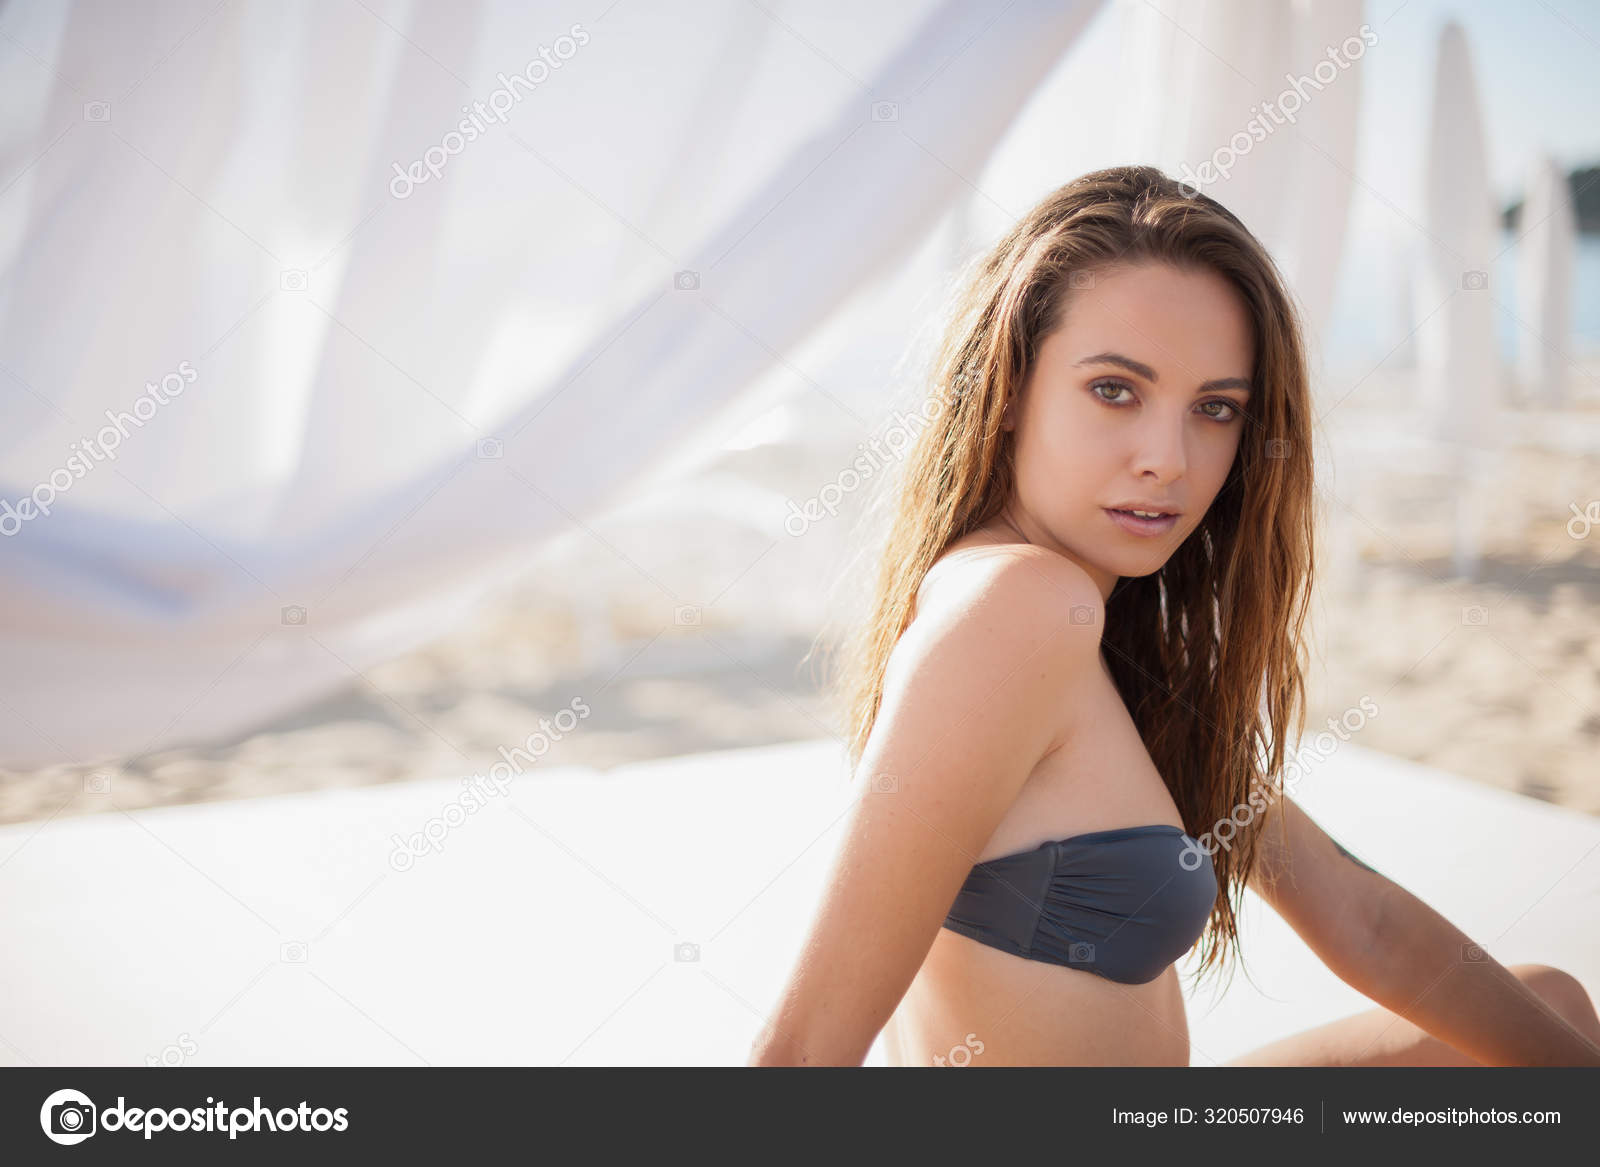 Jessica mcnamee Stock Photos, Royalty Free Jessica mcnamee Images  image